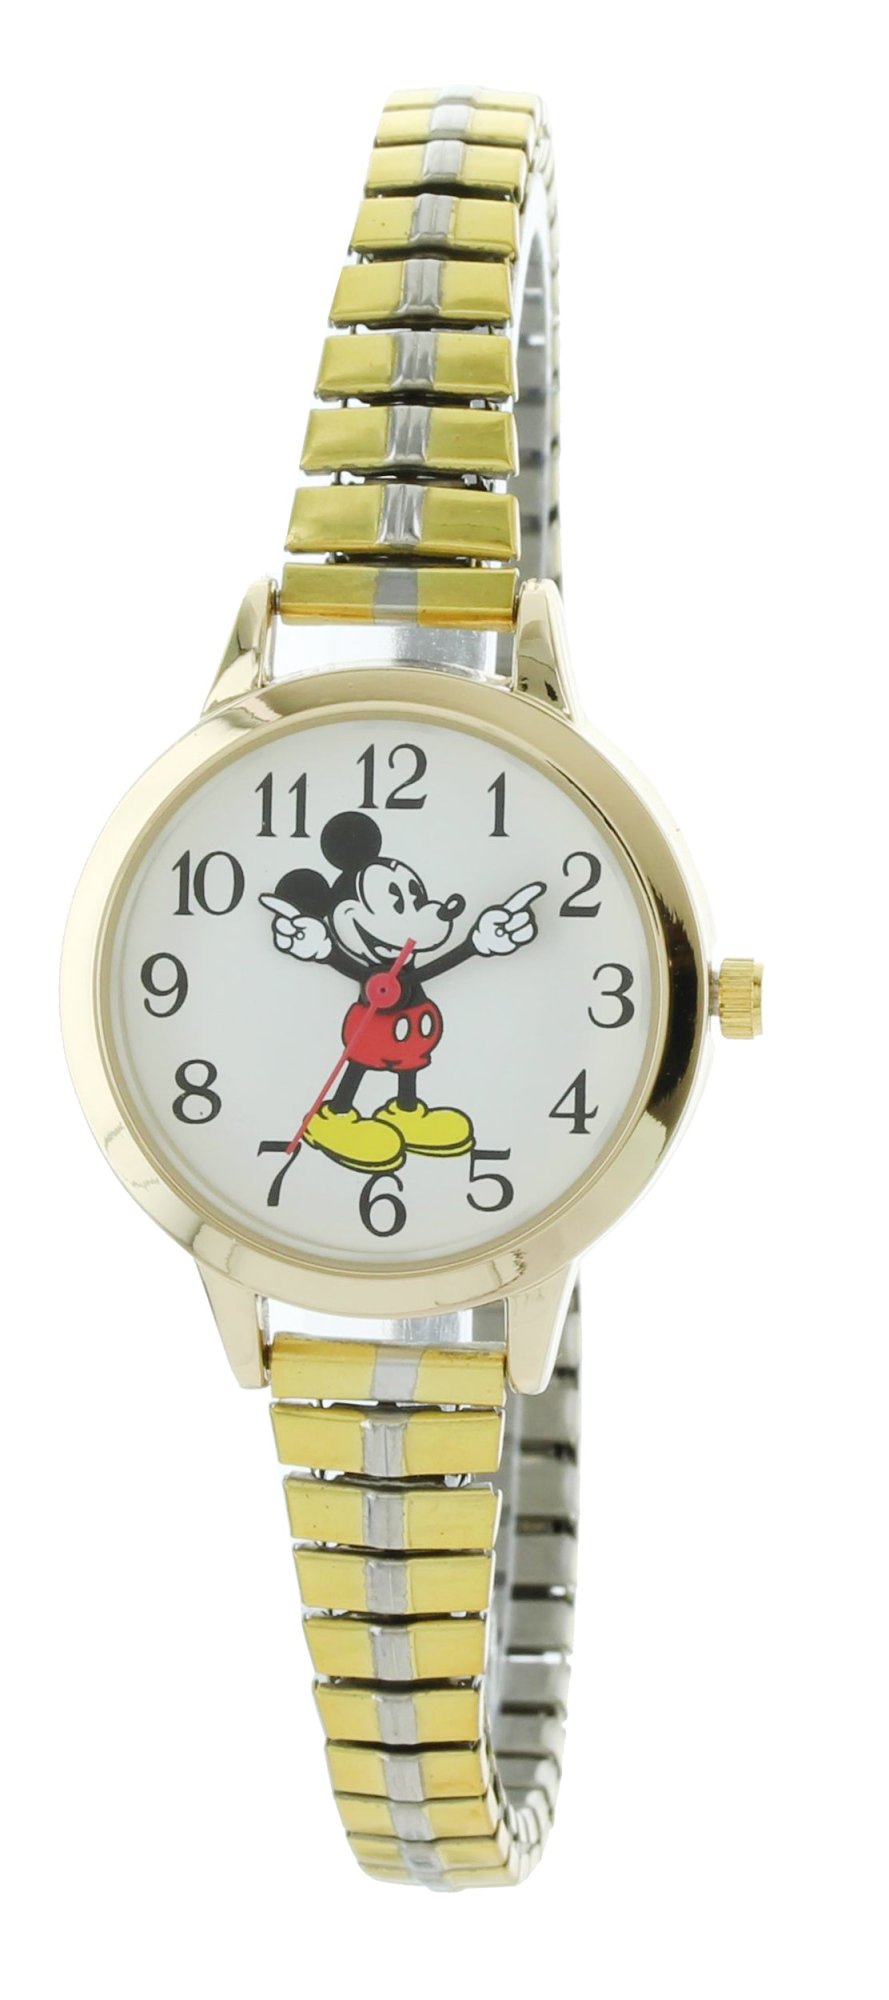 Model: Charming Disney Mickey Mouse Analog Watch with Pointing Hand and Stretch Band